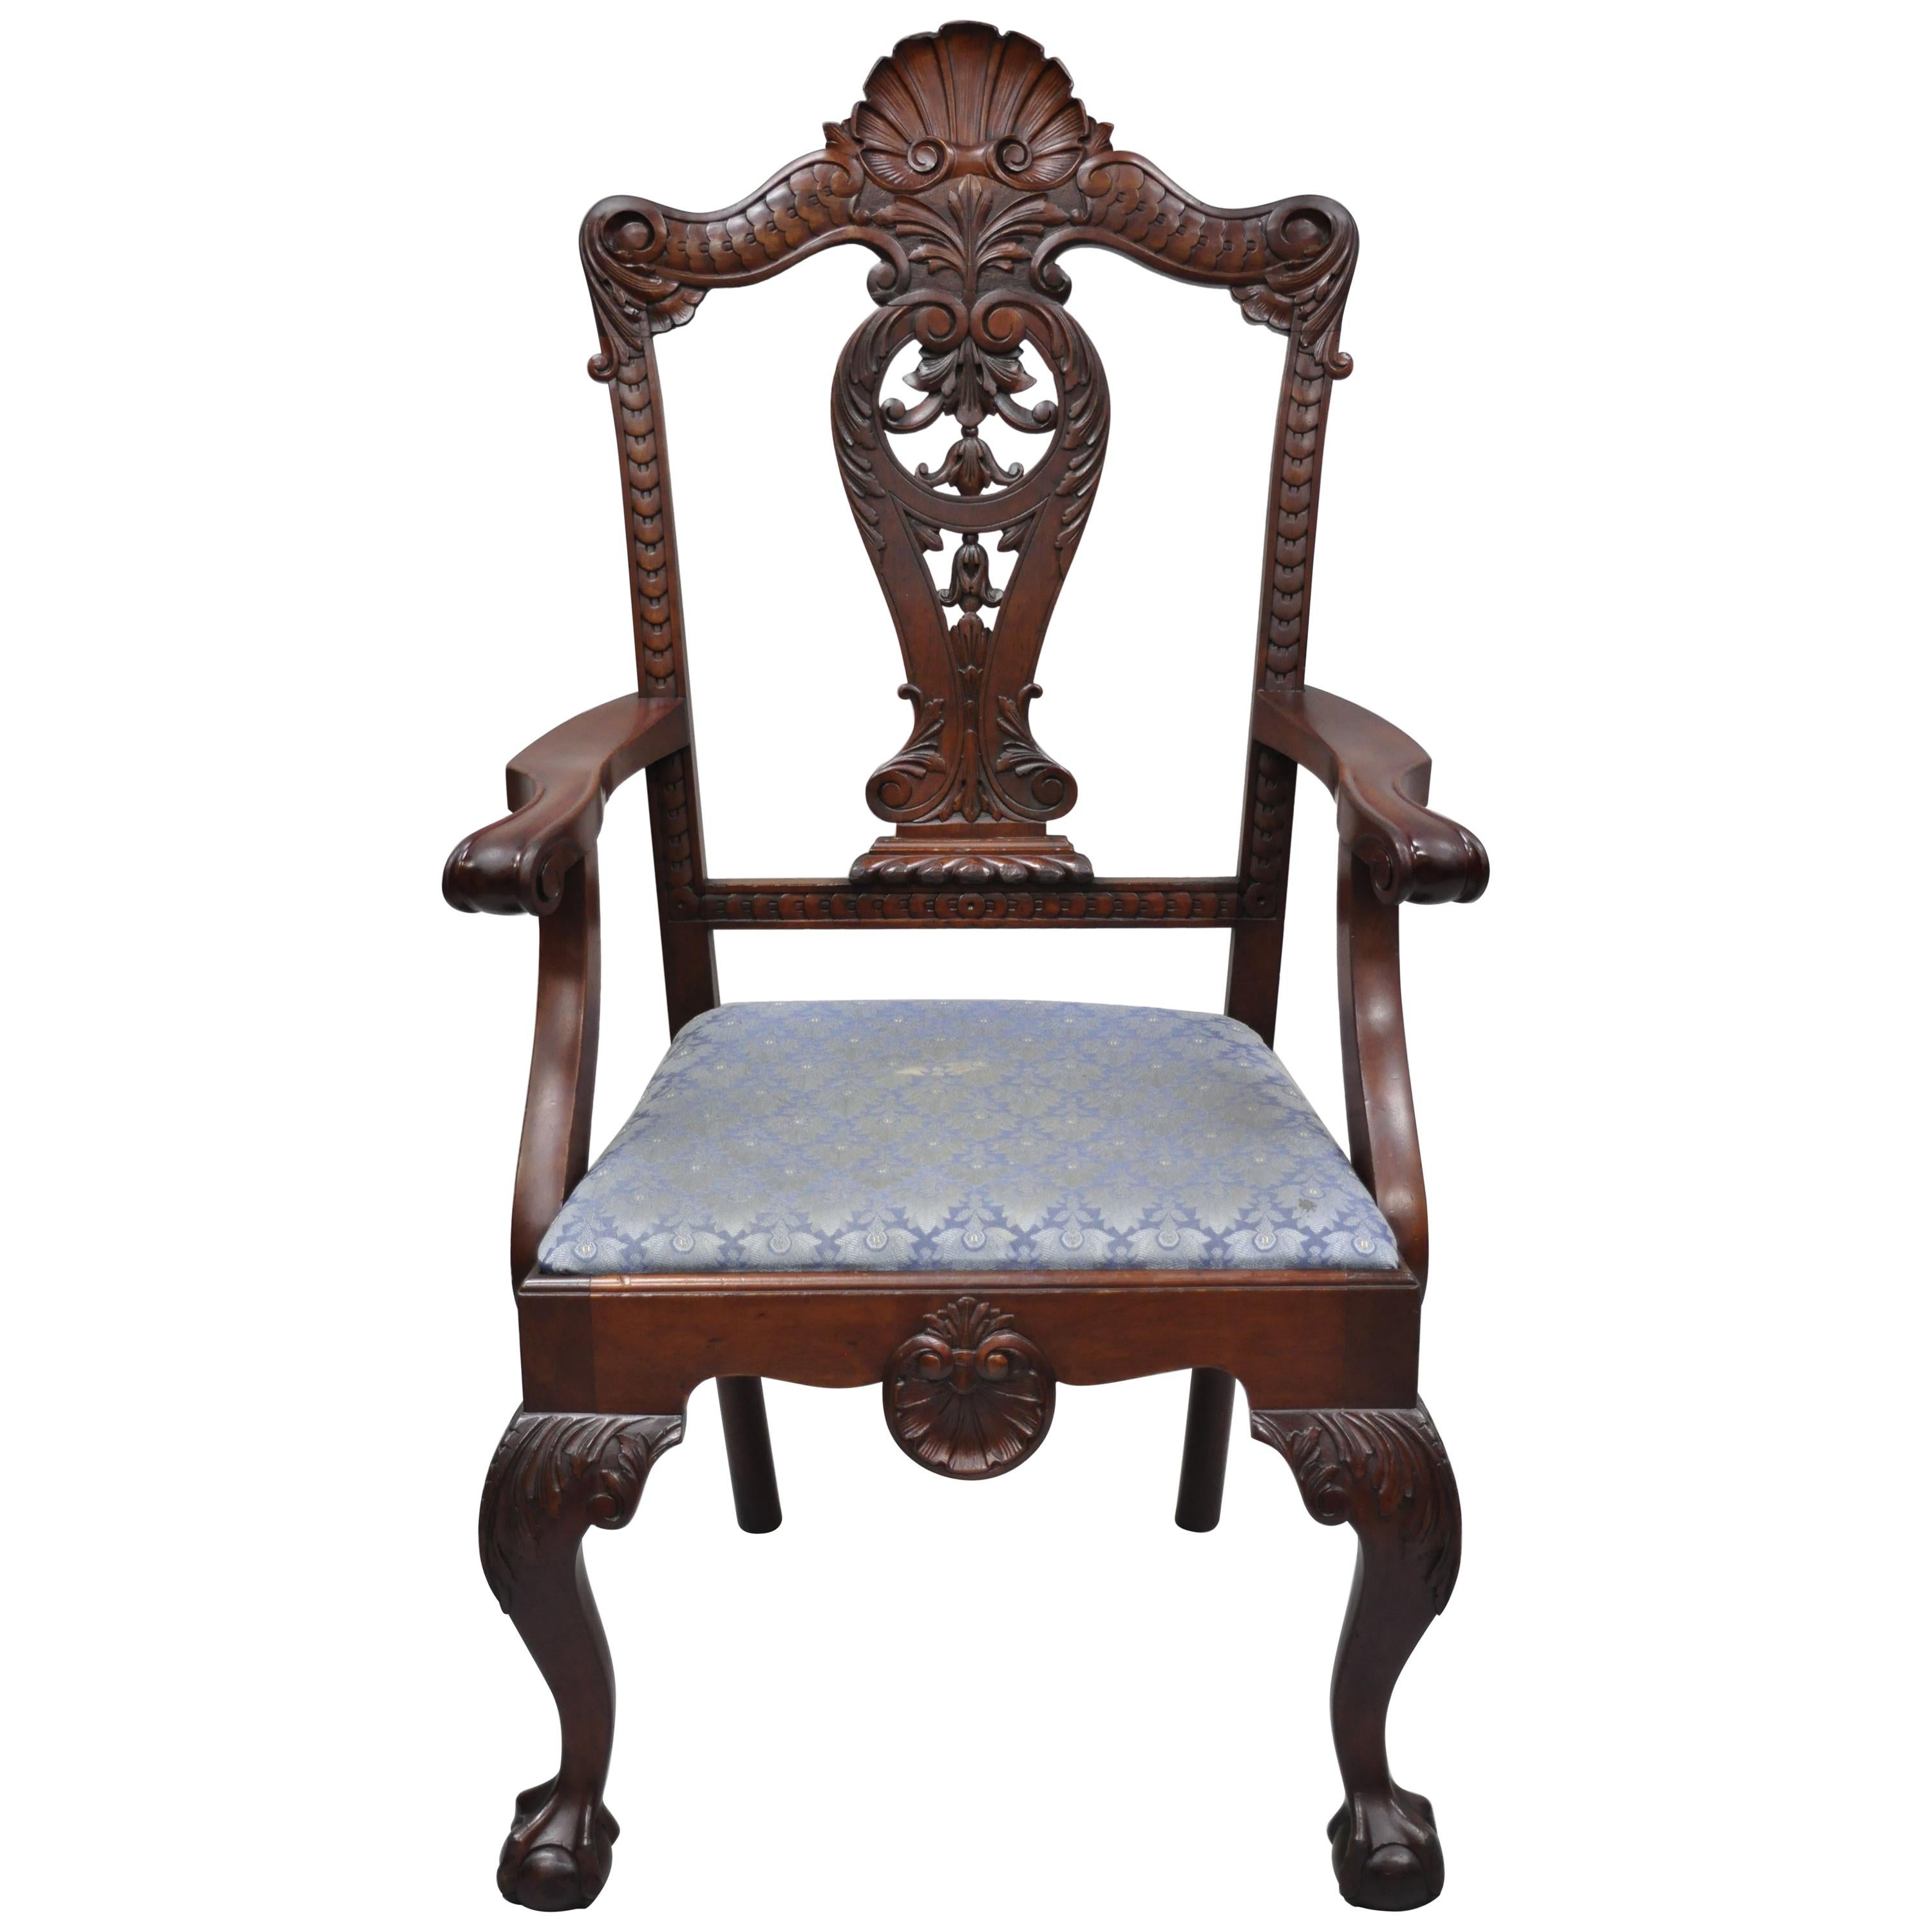 Antique Mahogany Georgian Chippendale Style Shell Carved Ball and Claw Armchair